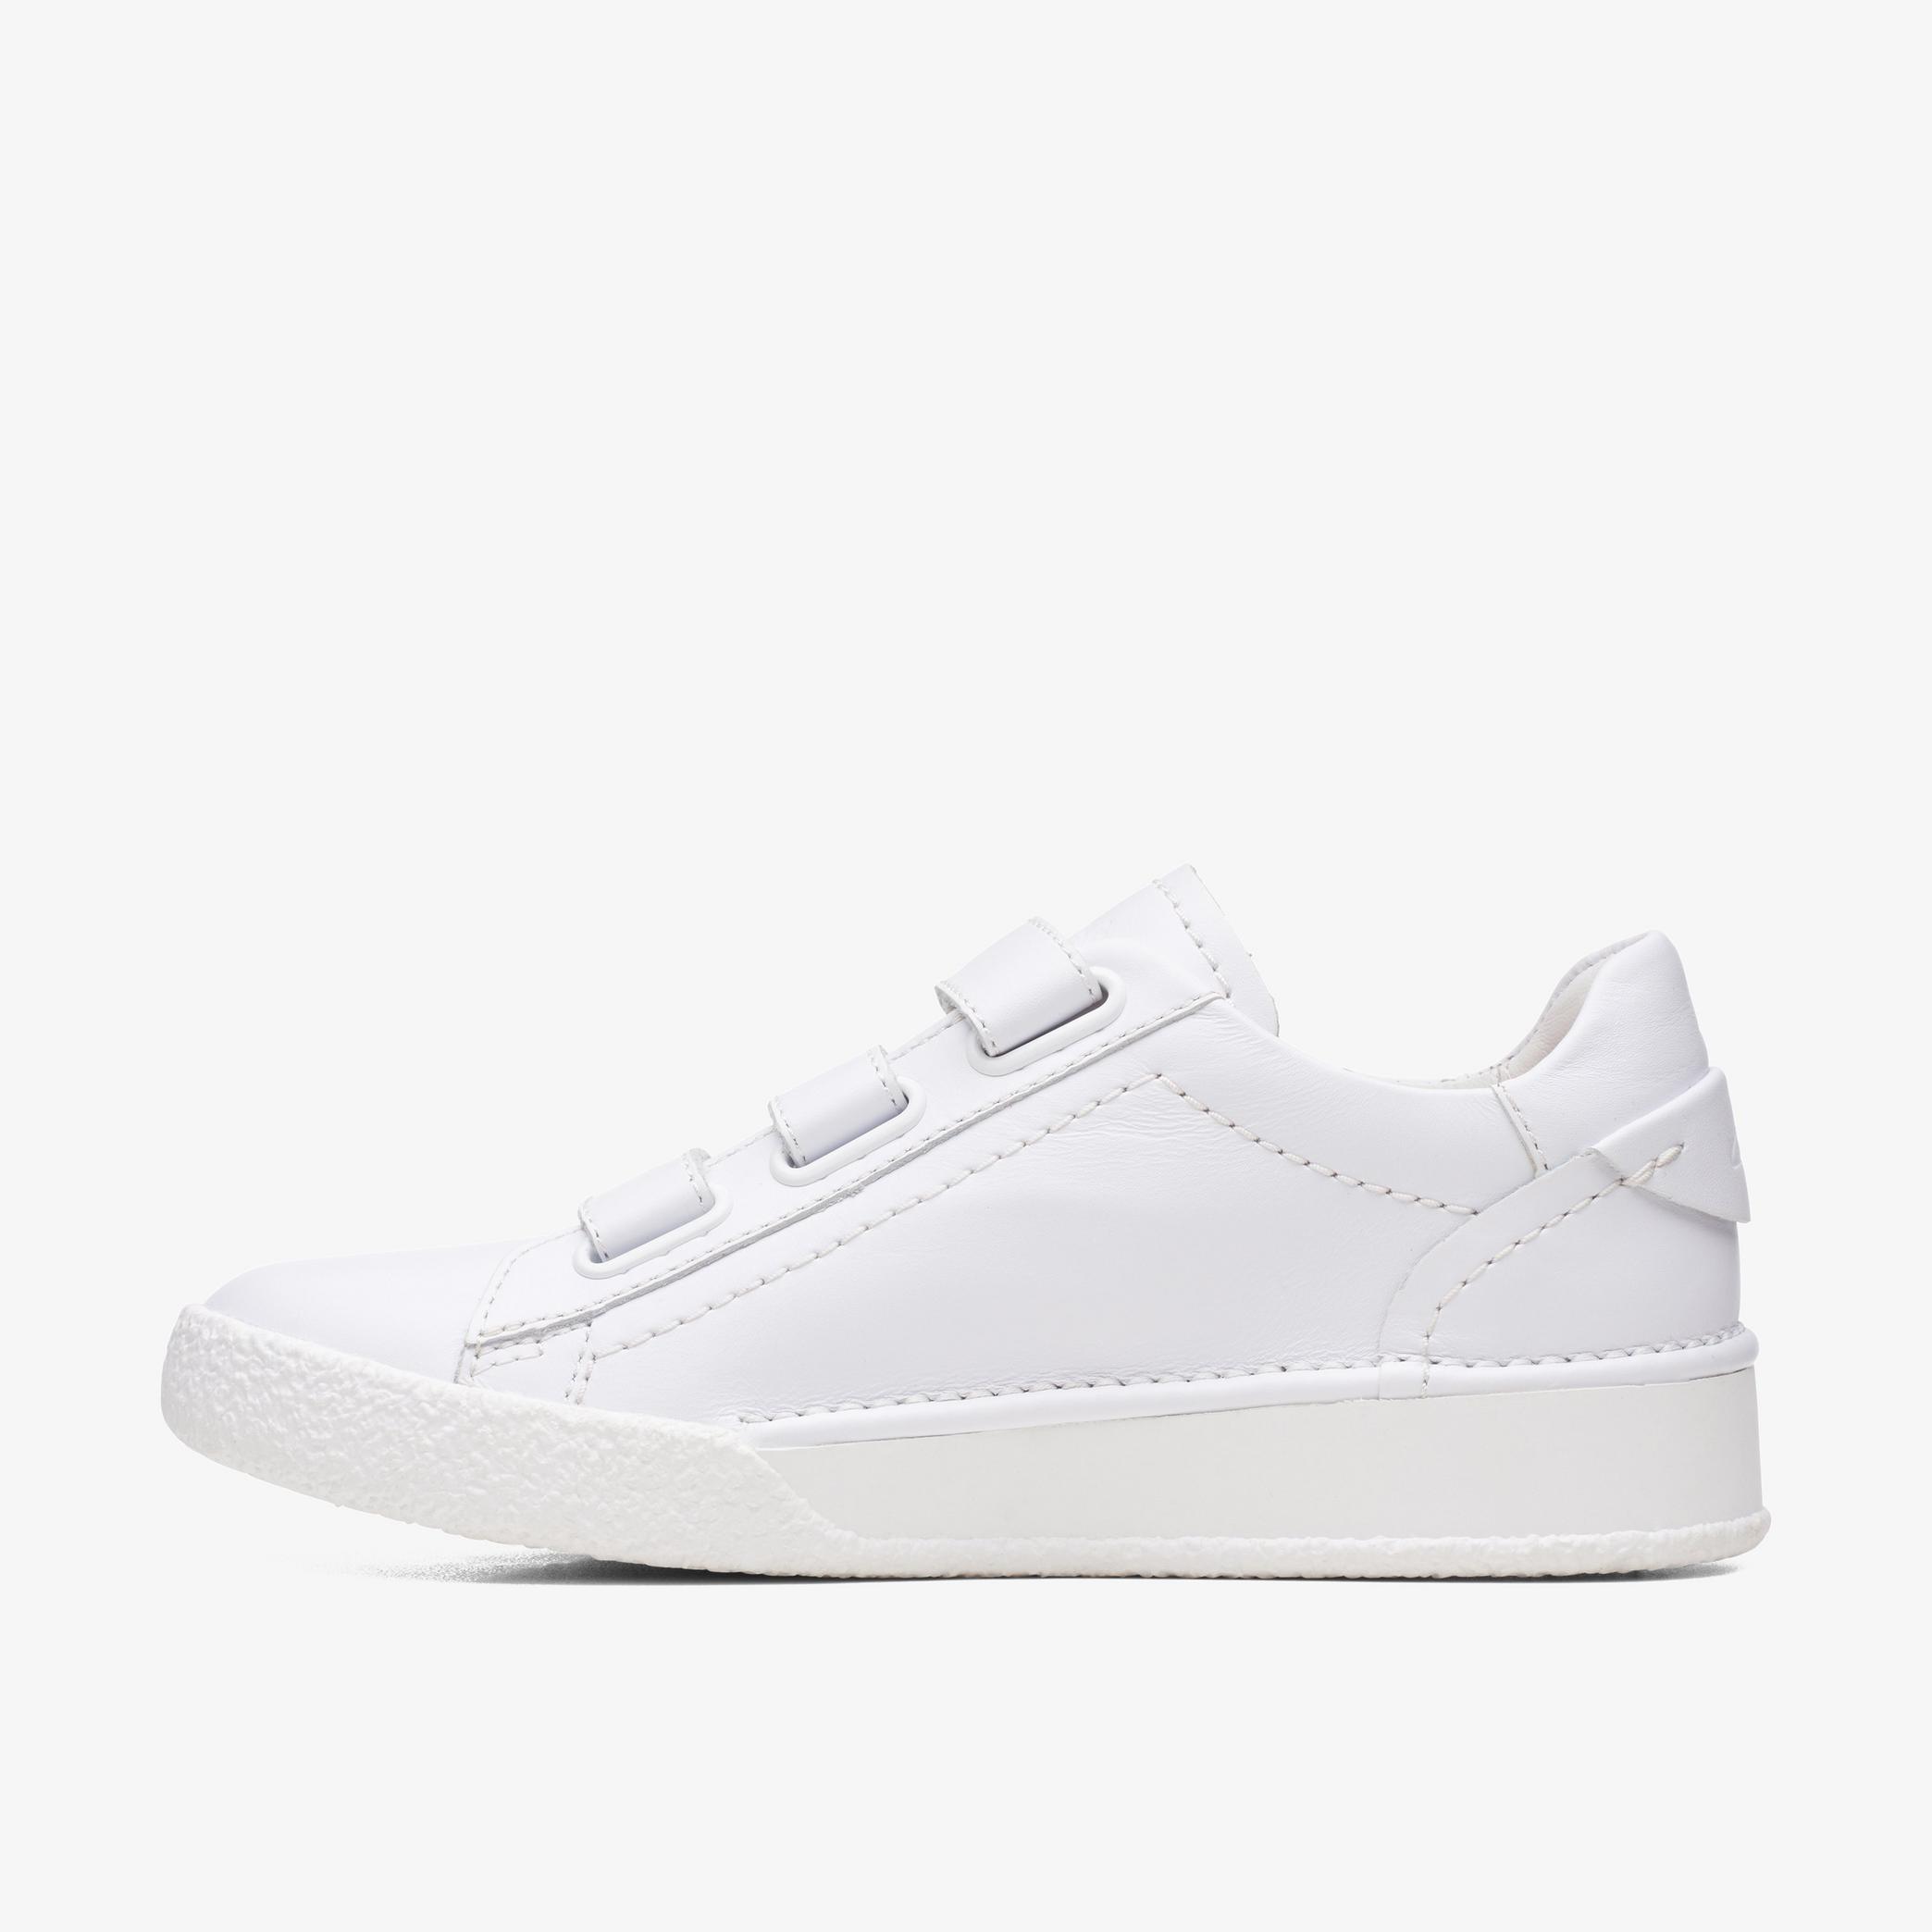 WOMENS Craft Cup Strap White Leather Trainers | Clarks Outlet